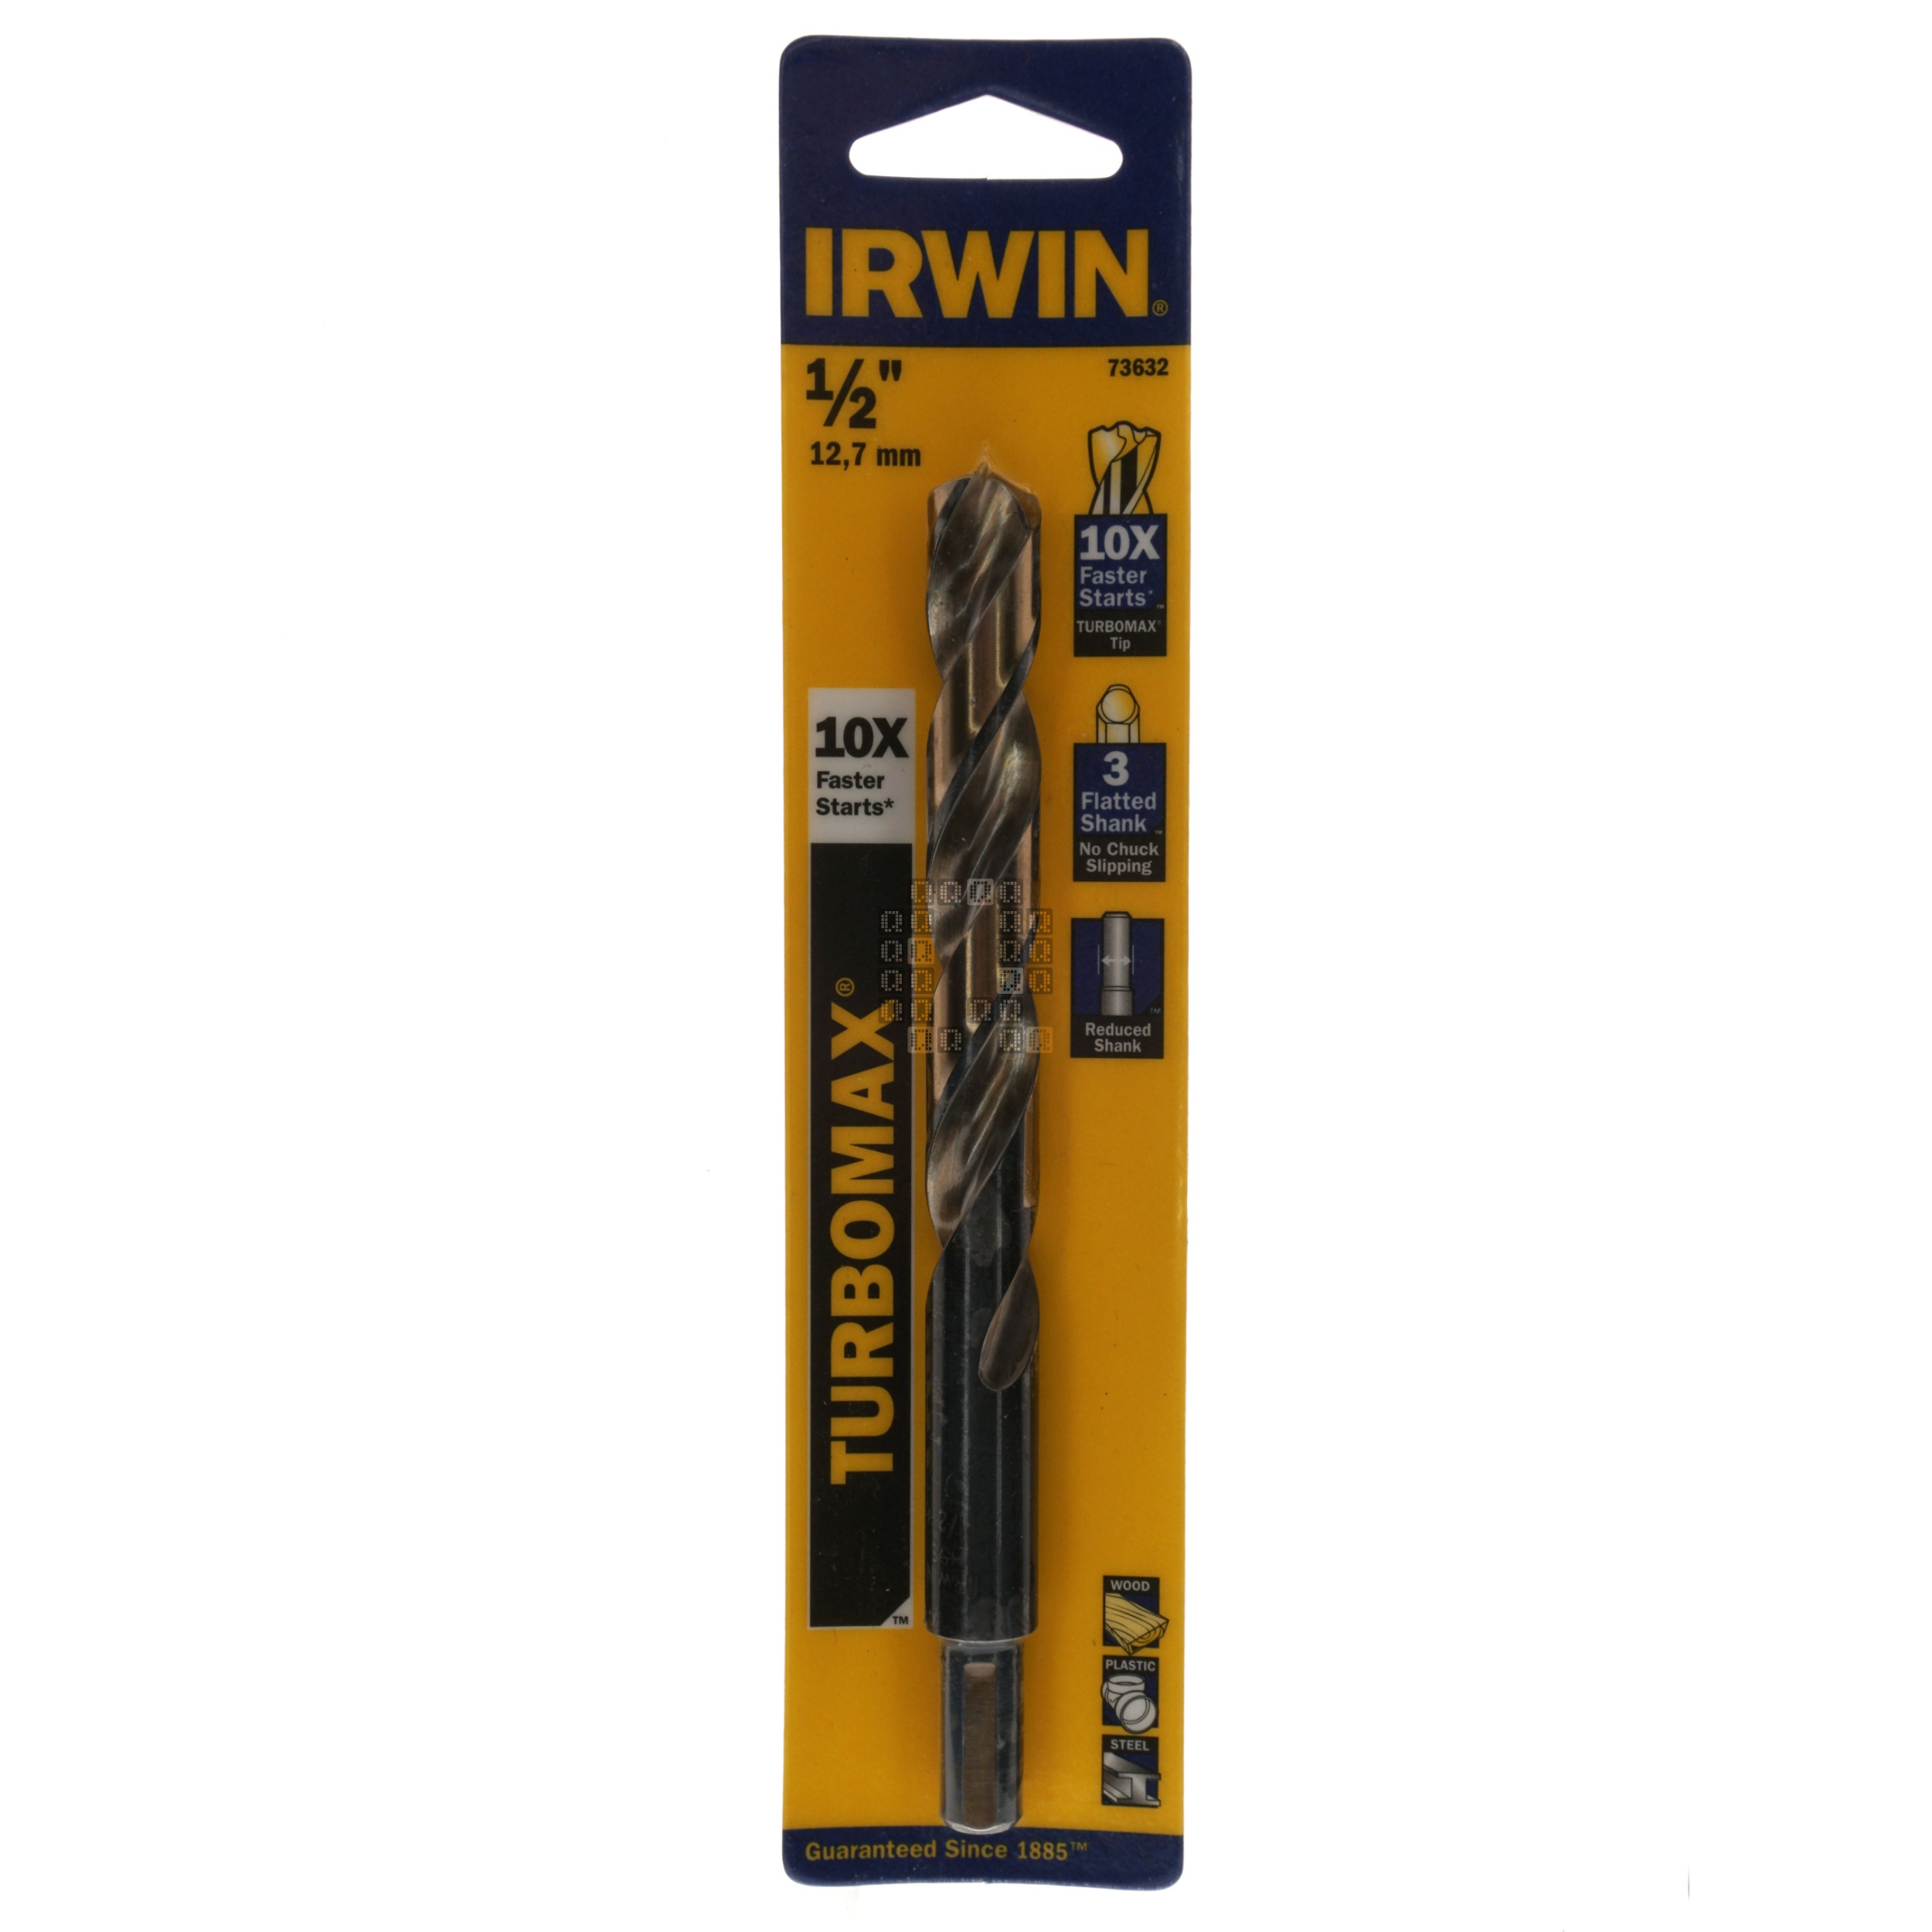 Irwin Industrial Tools 73632 TURBOMAX 1/2" Drill Bit with 3/8" Reduced Shank